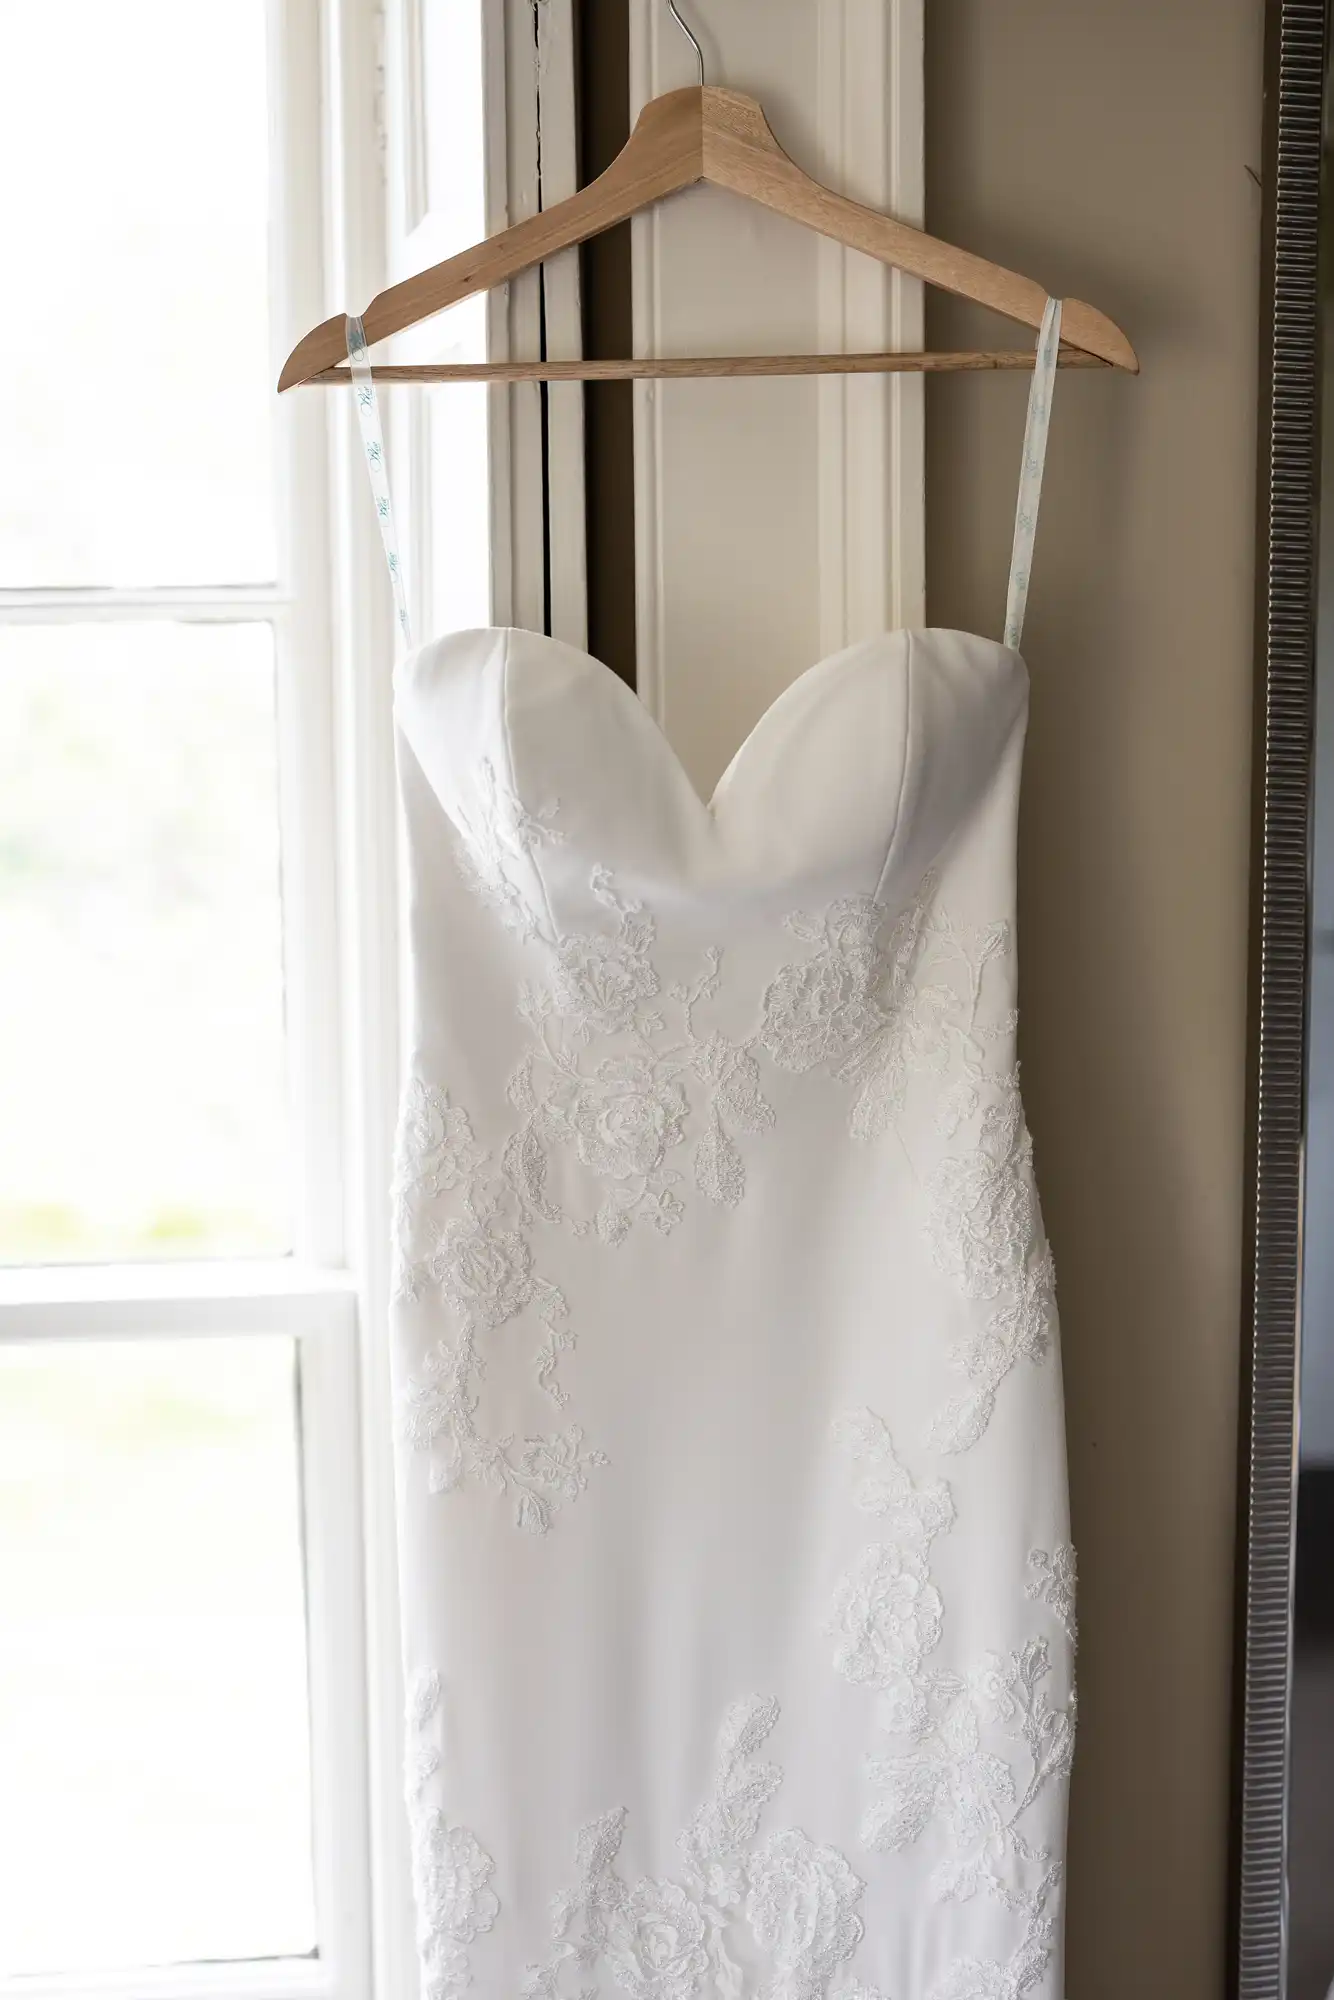 A white wedding dress with lace details hanging on a wooden hanger in front of a window.